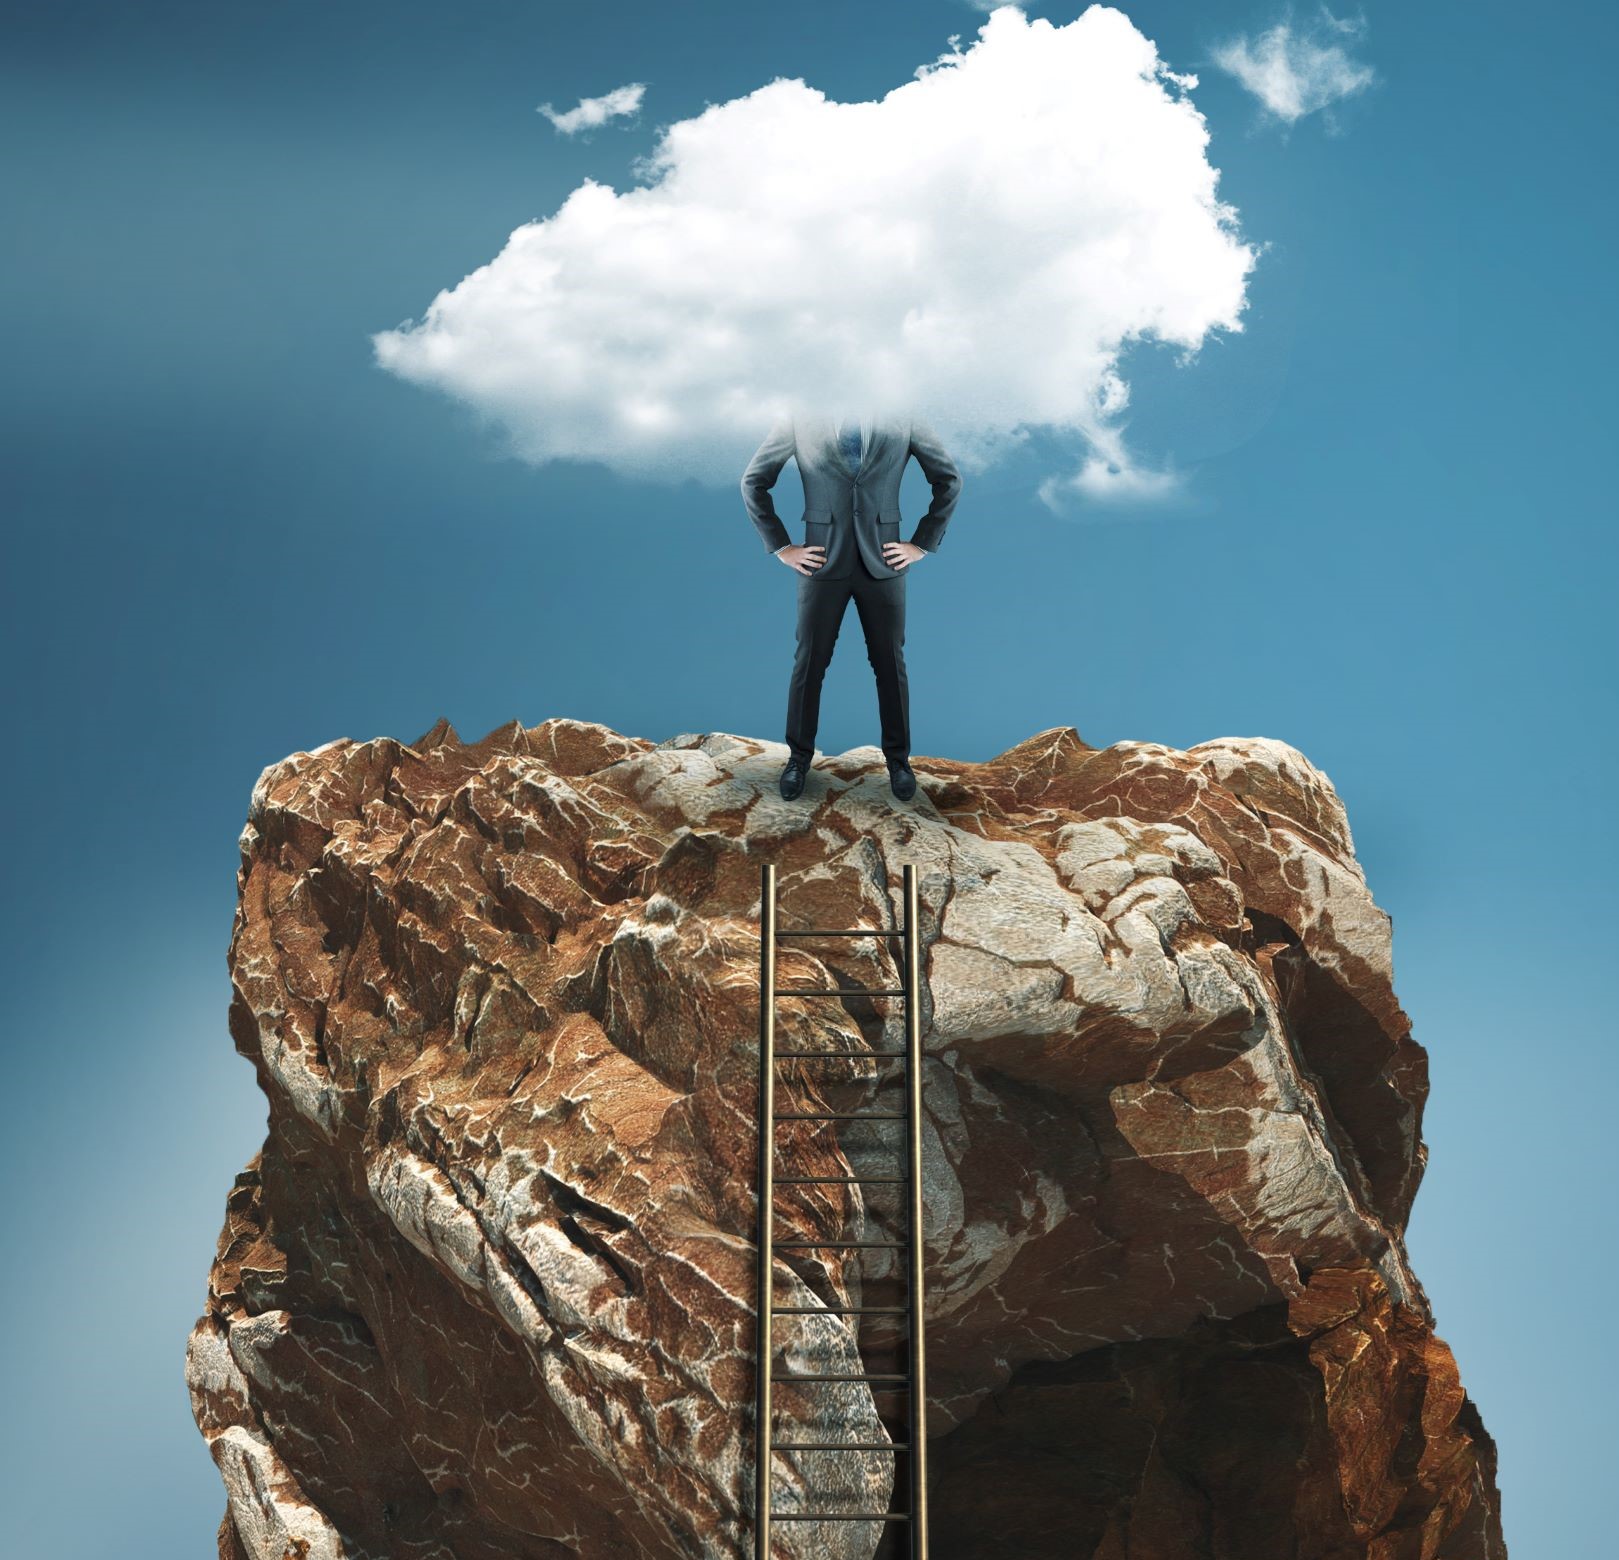 Man at the top of a ladder on a rock with his head in the clouds